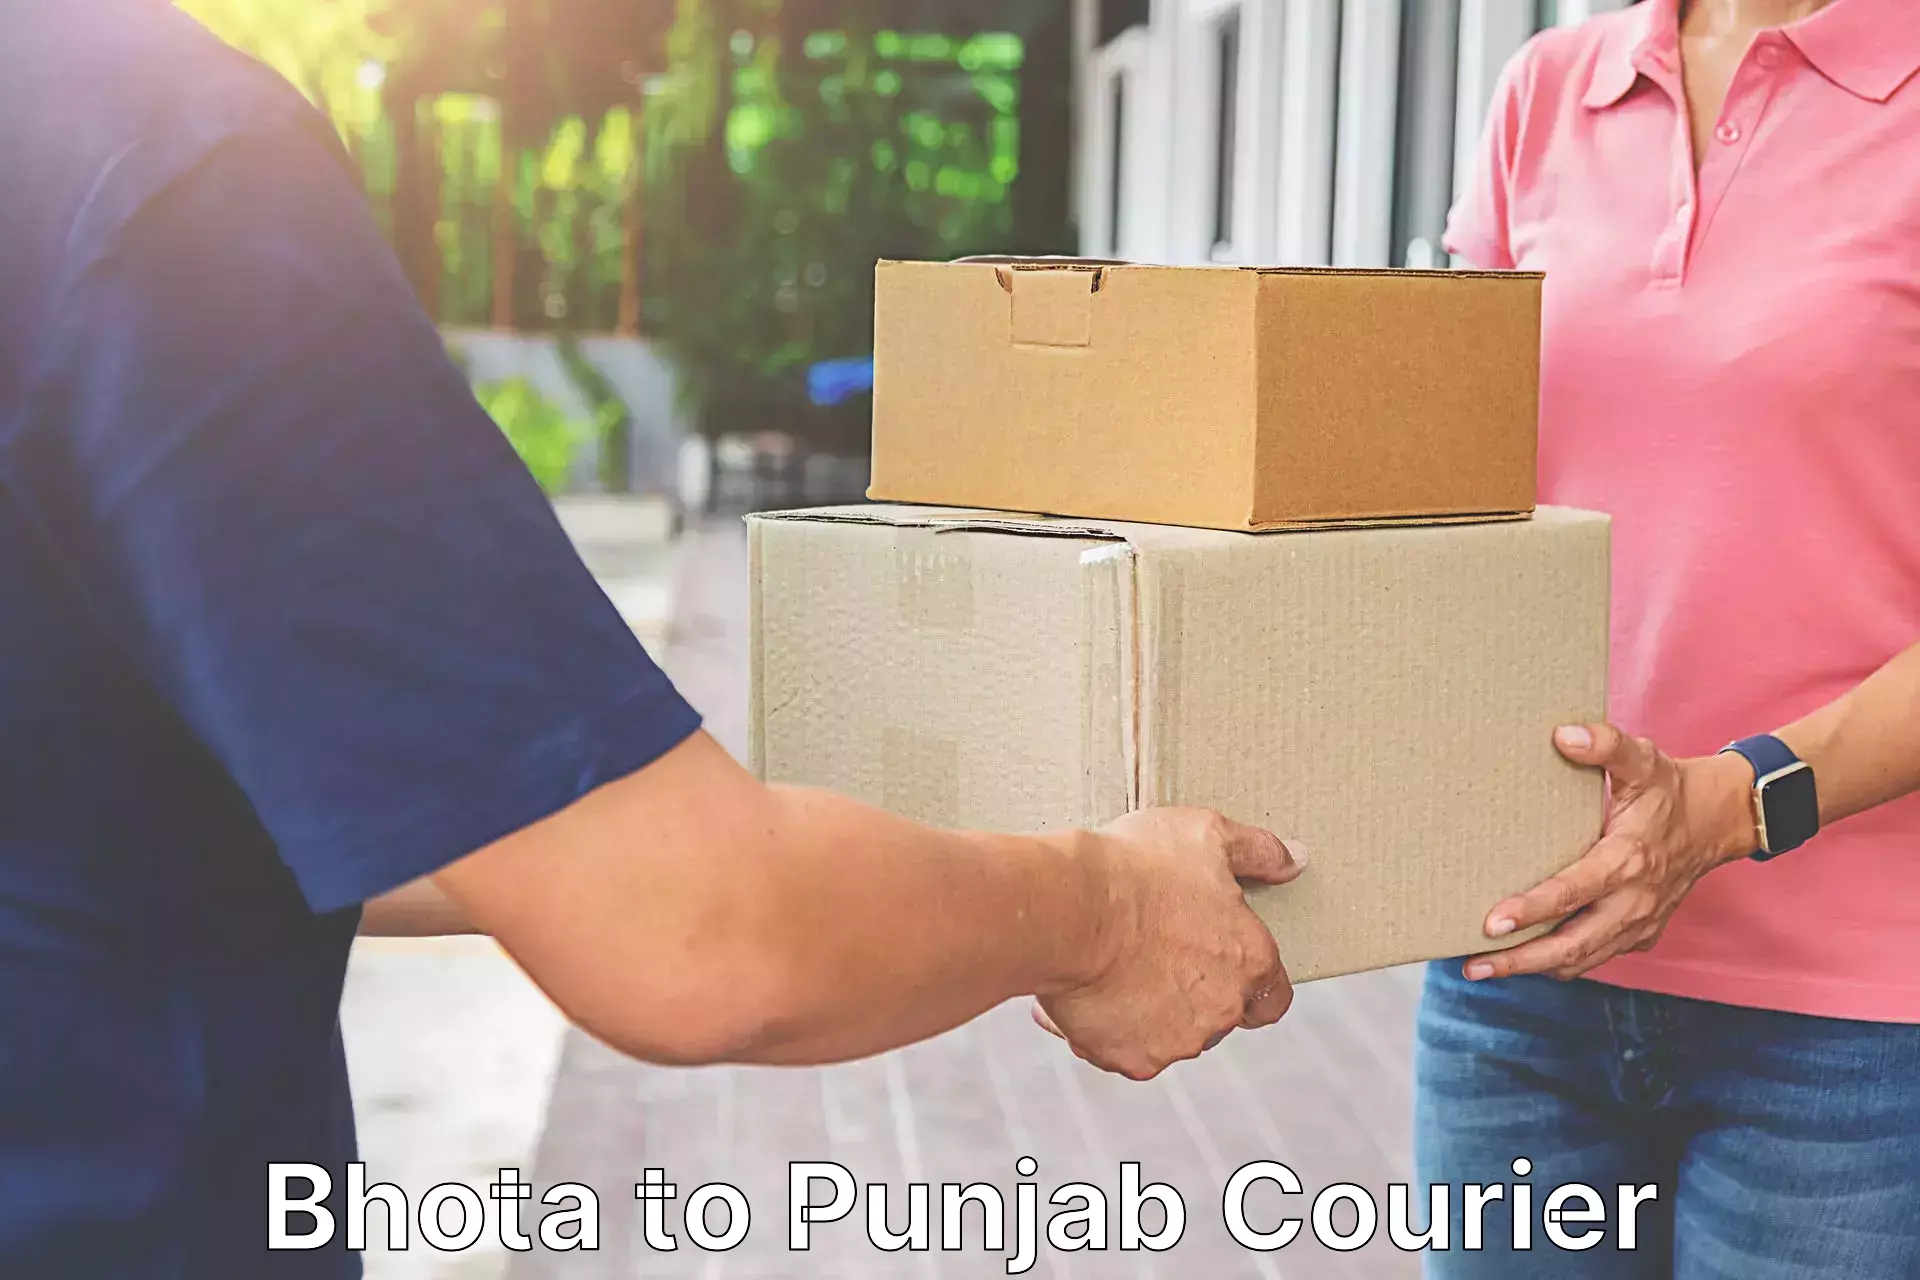 Multi-service courier options Bhota to Bathinda